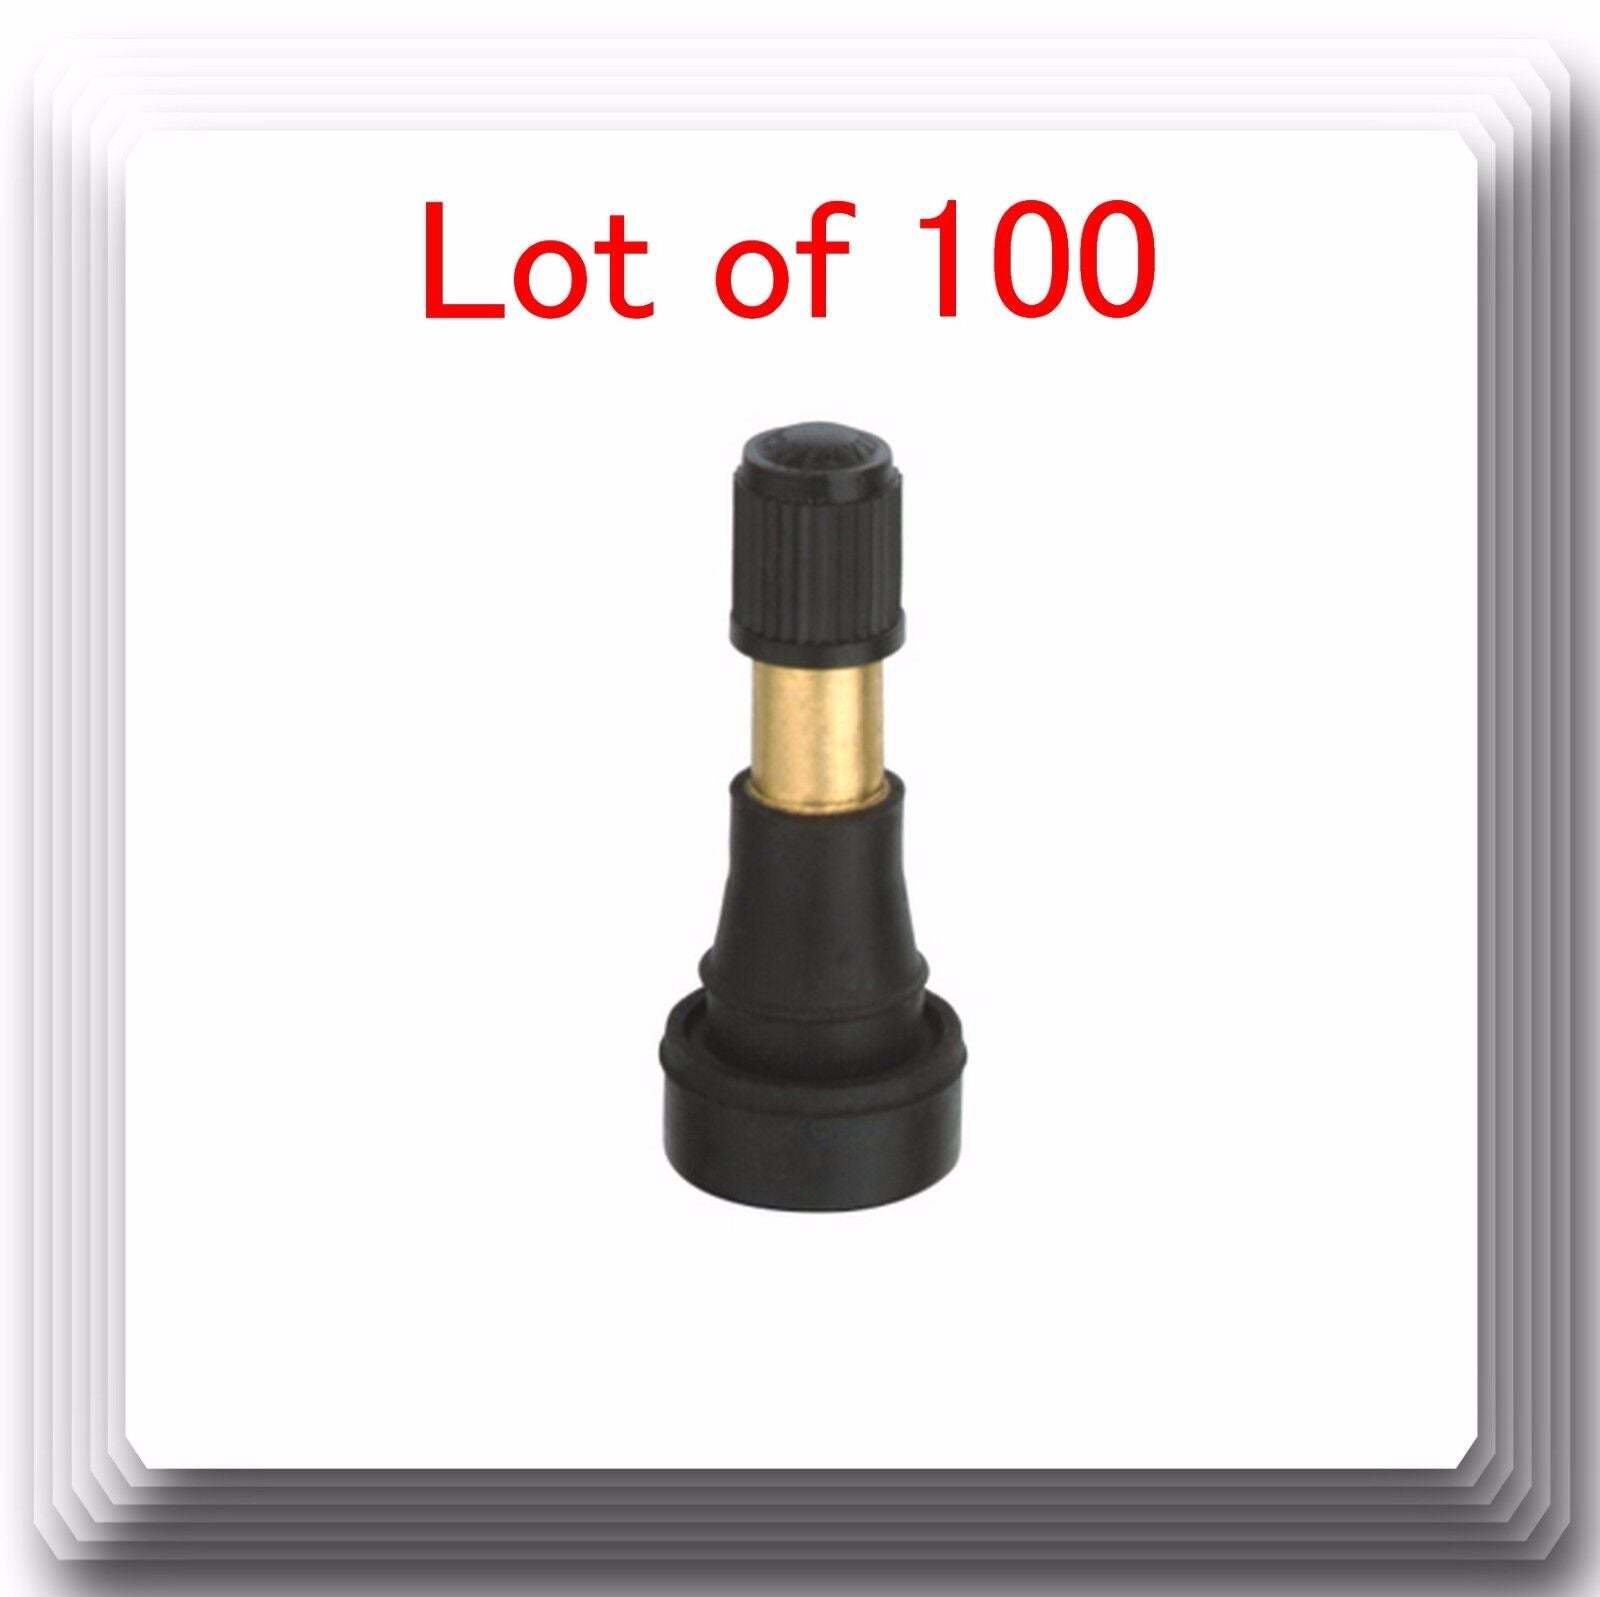 Primary image for Lot of 100 Kits TR600HP High Pressure Tire Wheel Valve Stems